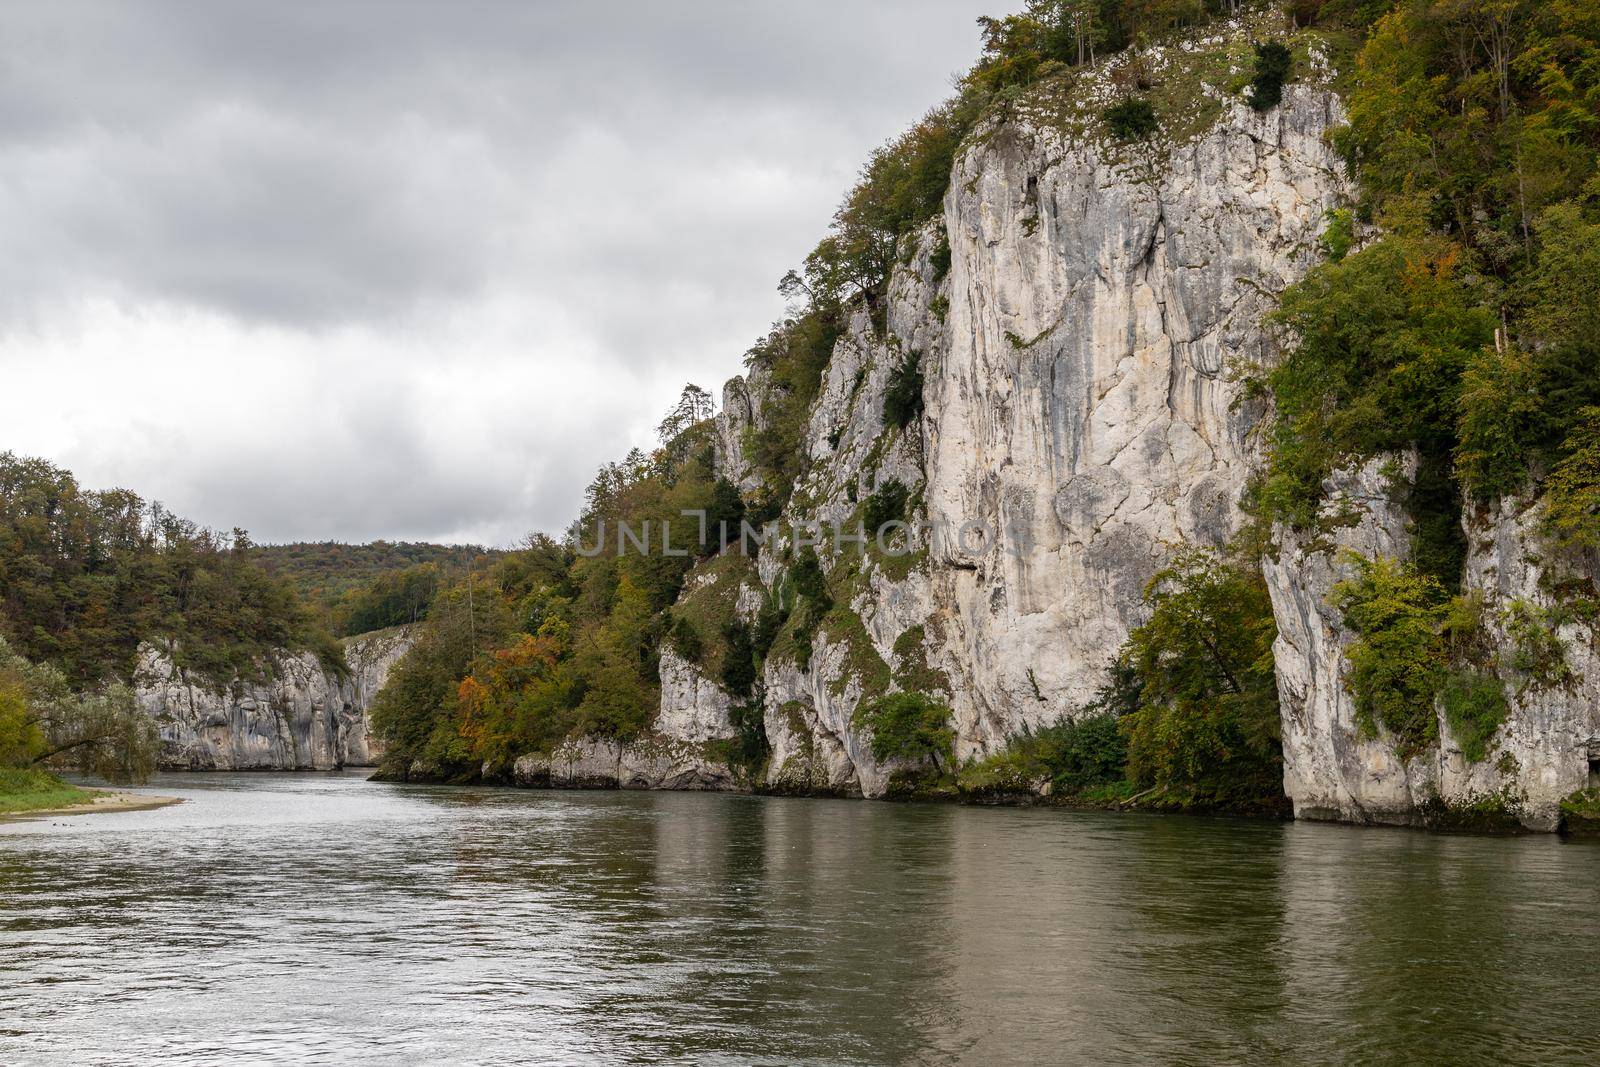 Danube river at Danube breakthrough near Kelheim, Bavaria, Germany in autumn with limestone rock formations and plants with colorful leaves